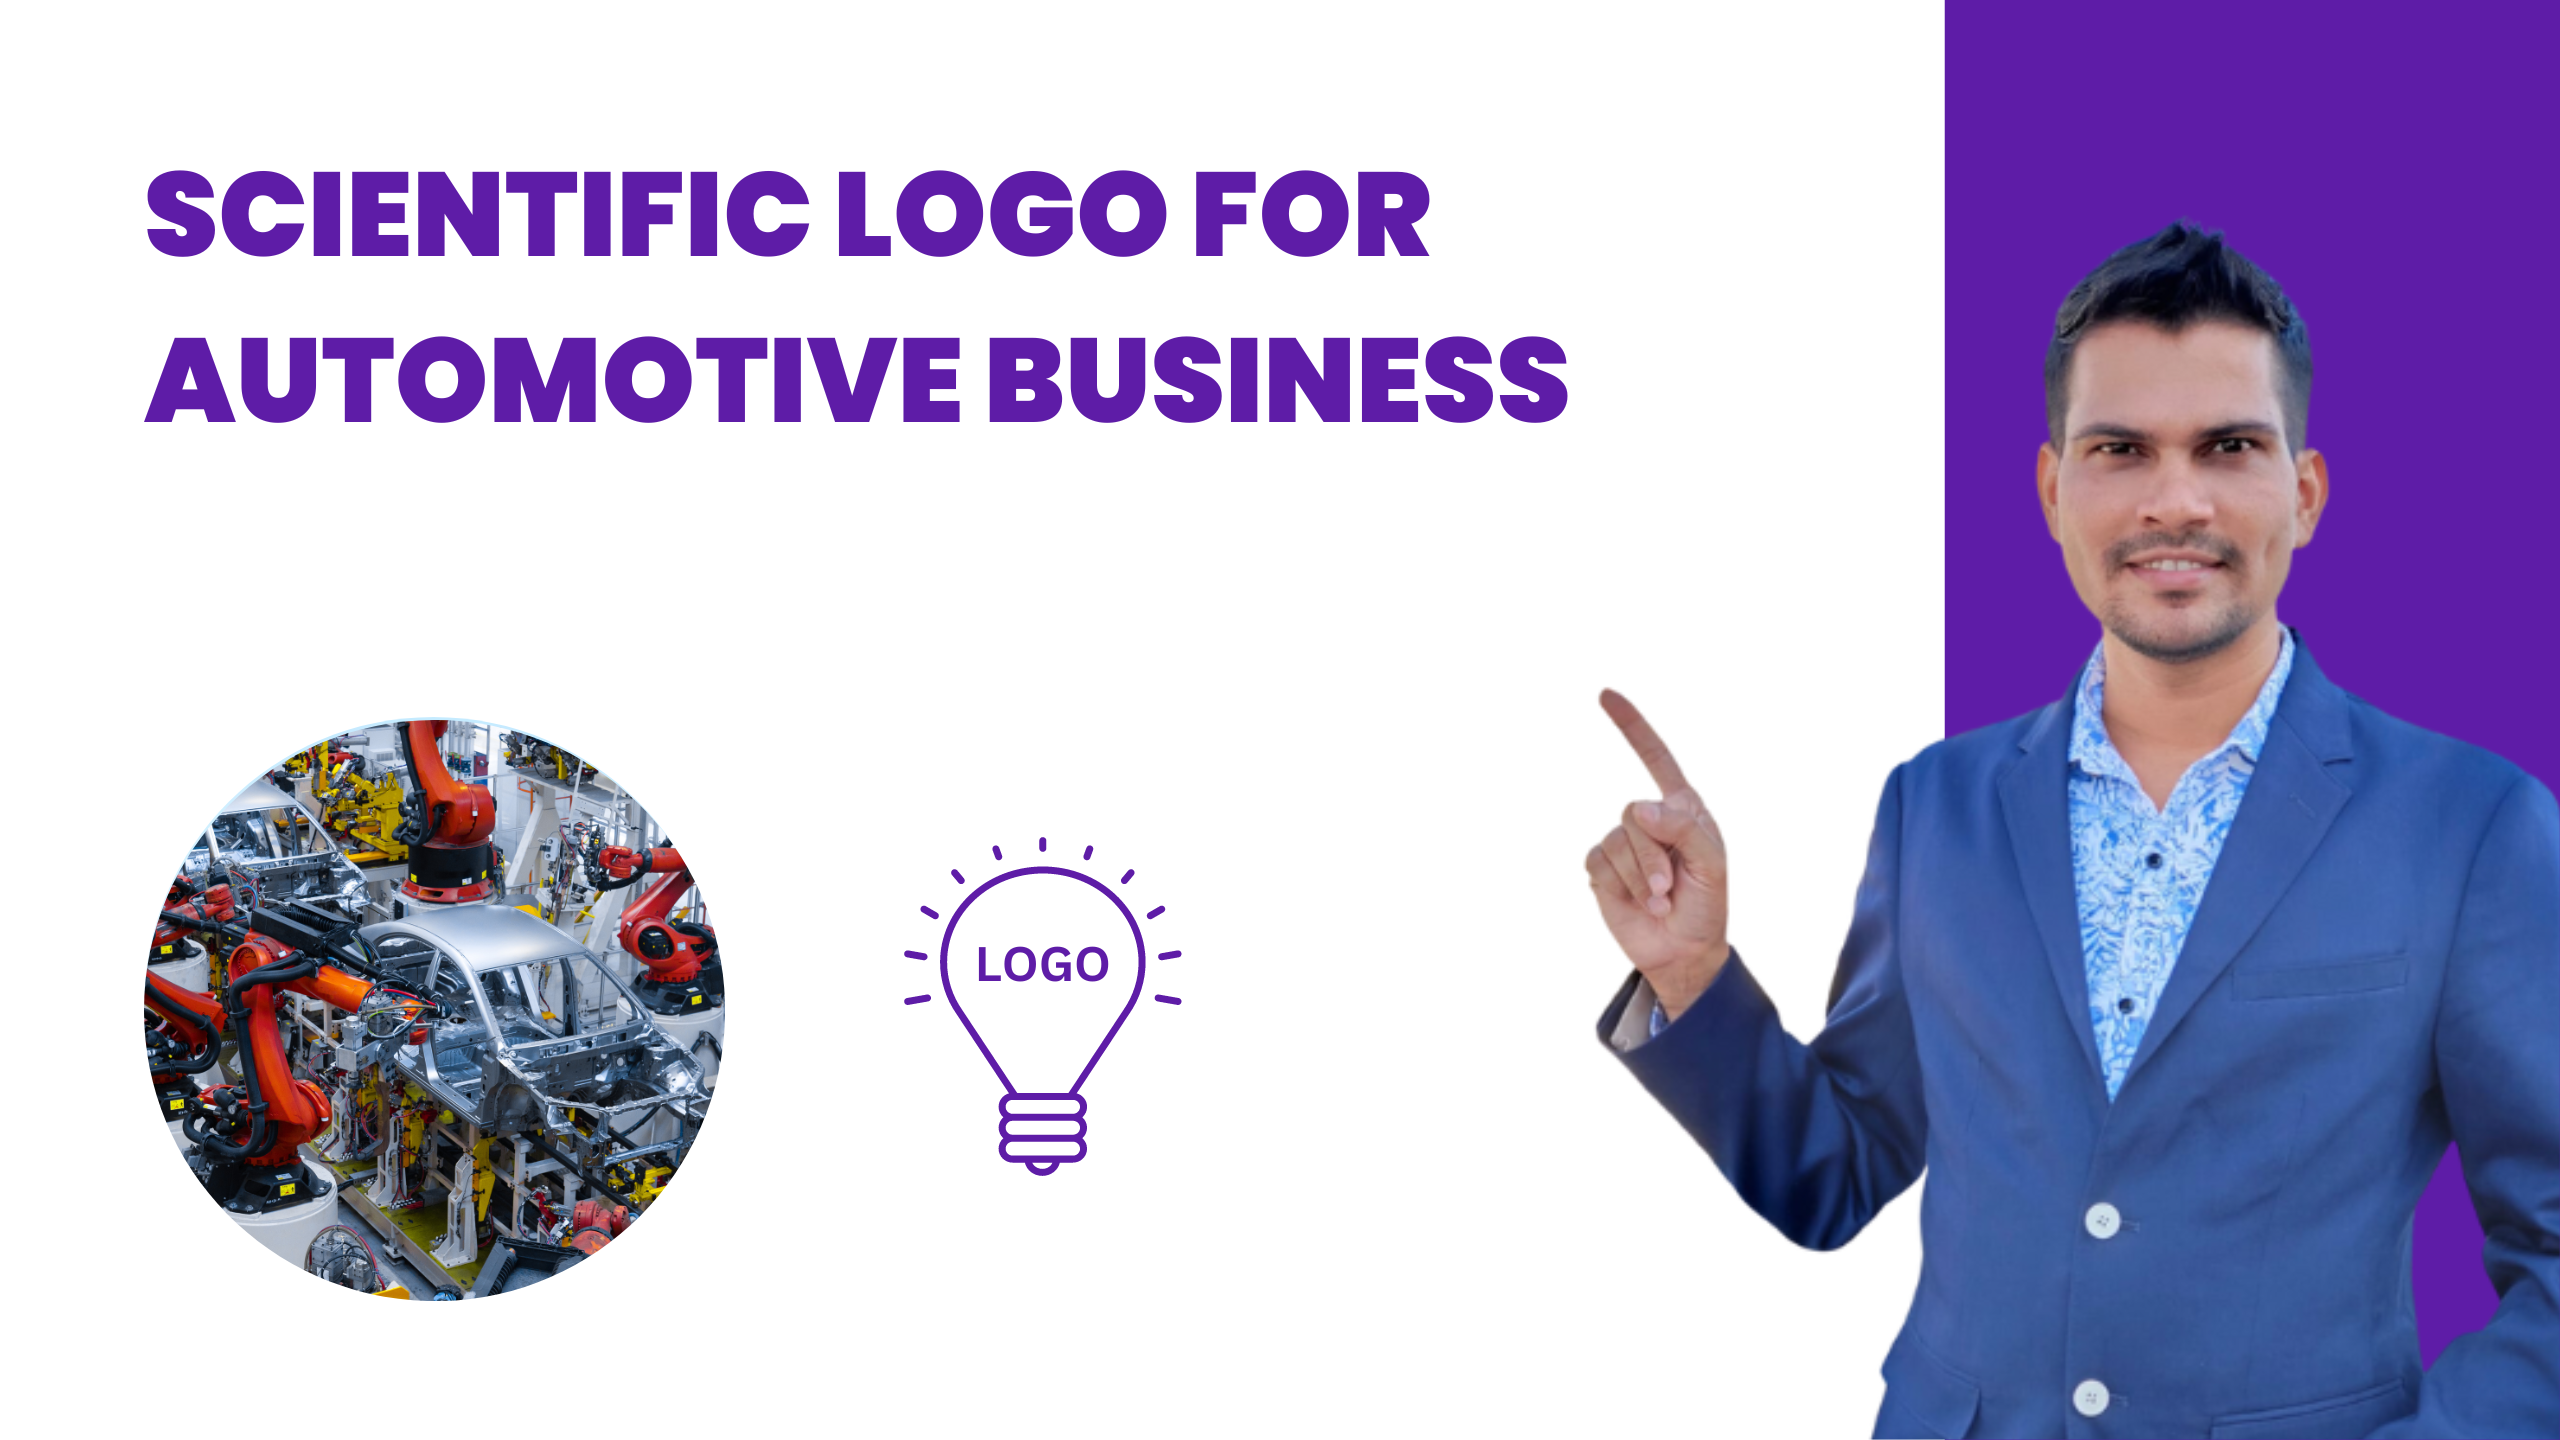 Automotive Business Logo by subhash, Revving Up Success: The Science Behind Automotive Business Logo By Subhash, Scientific Logo by Subhash